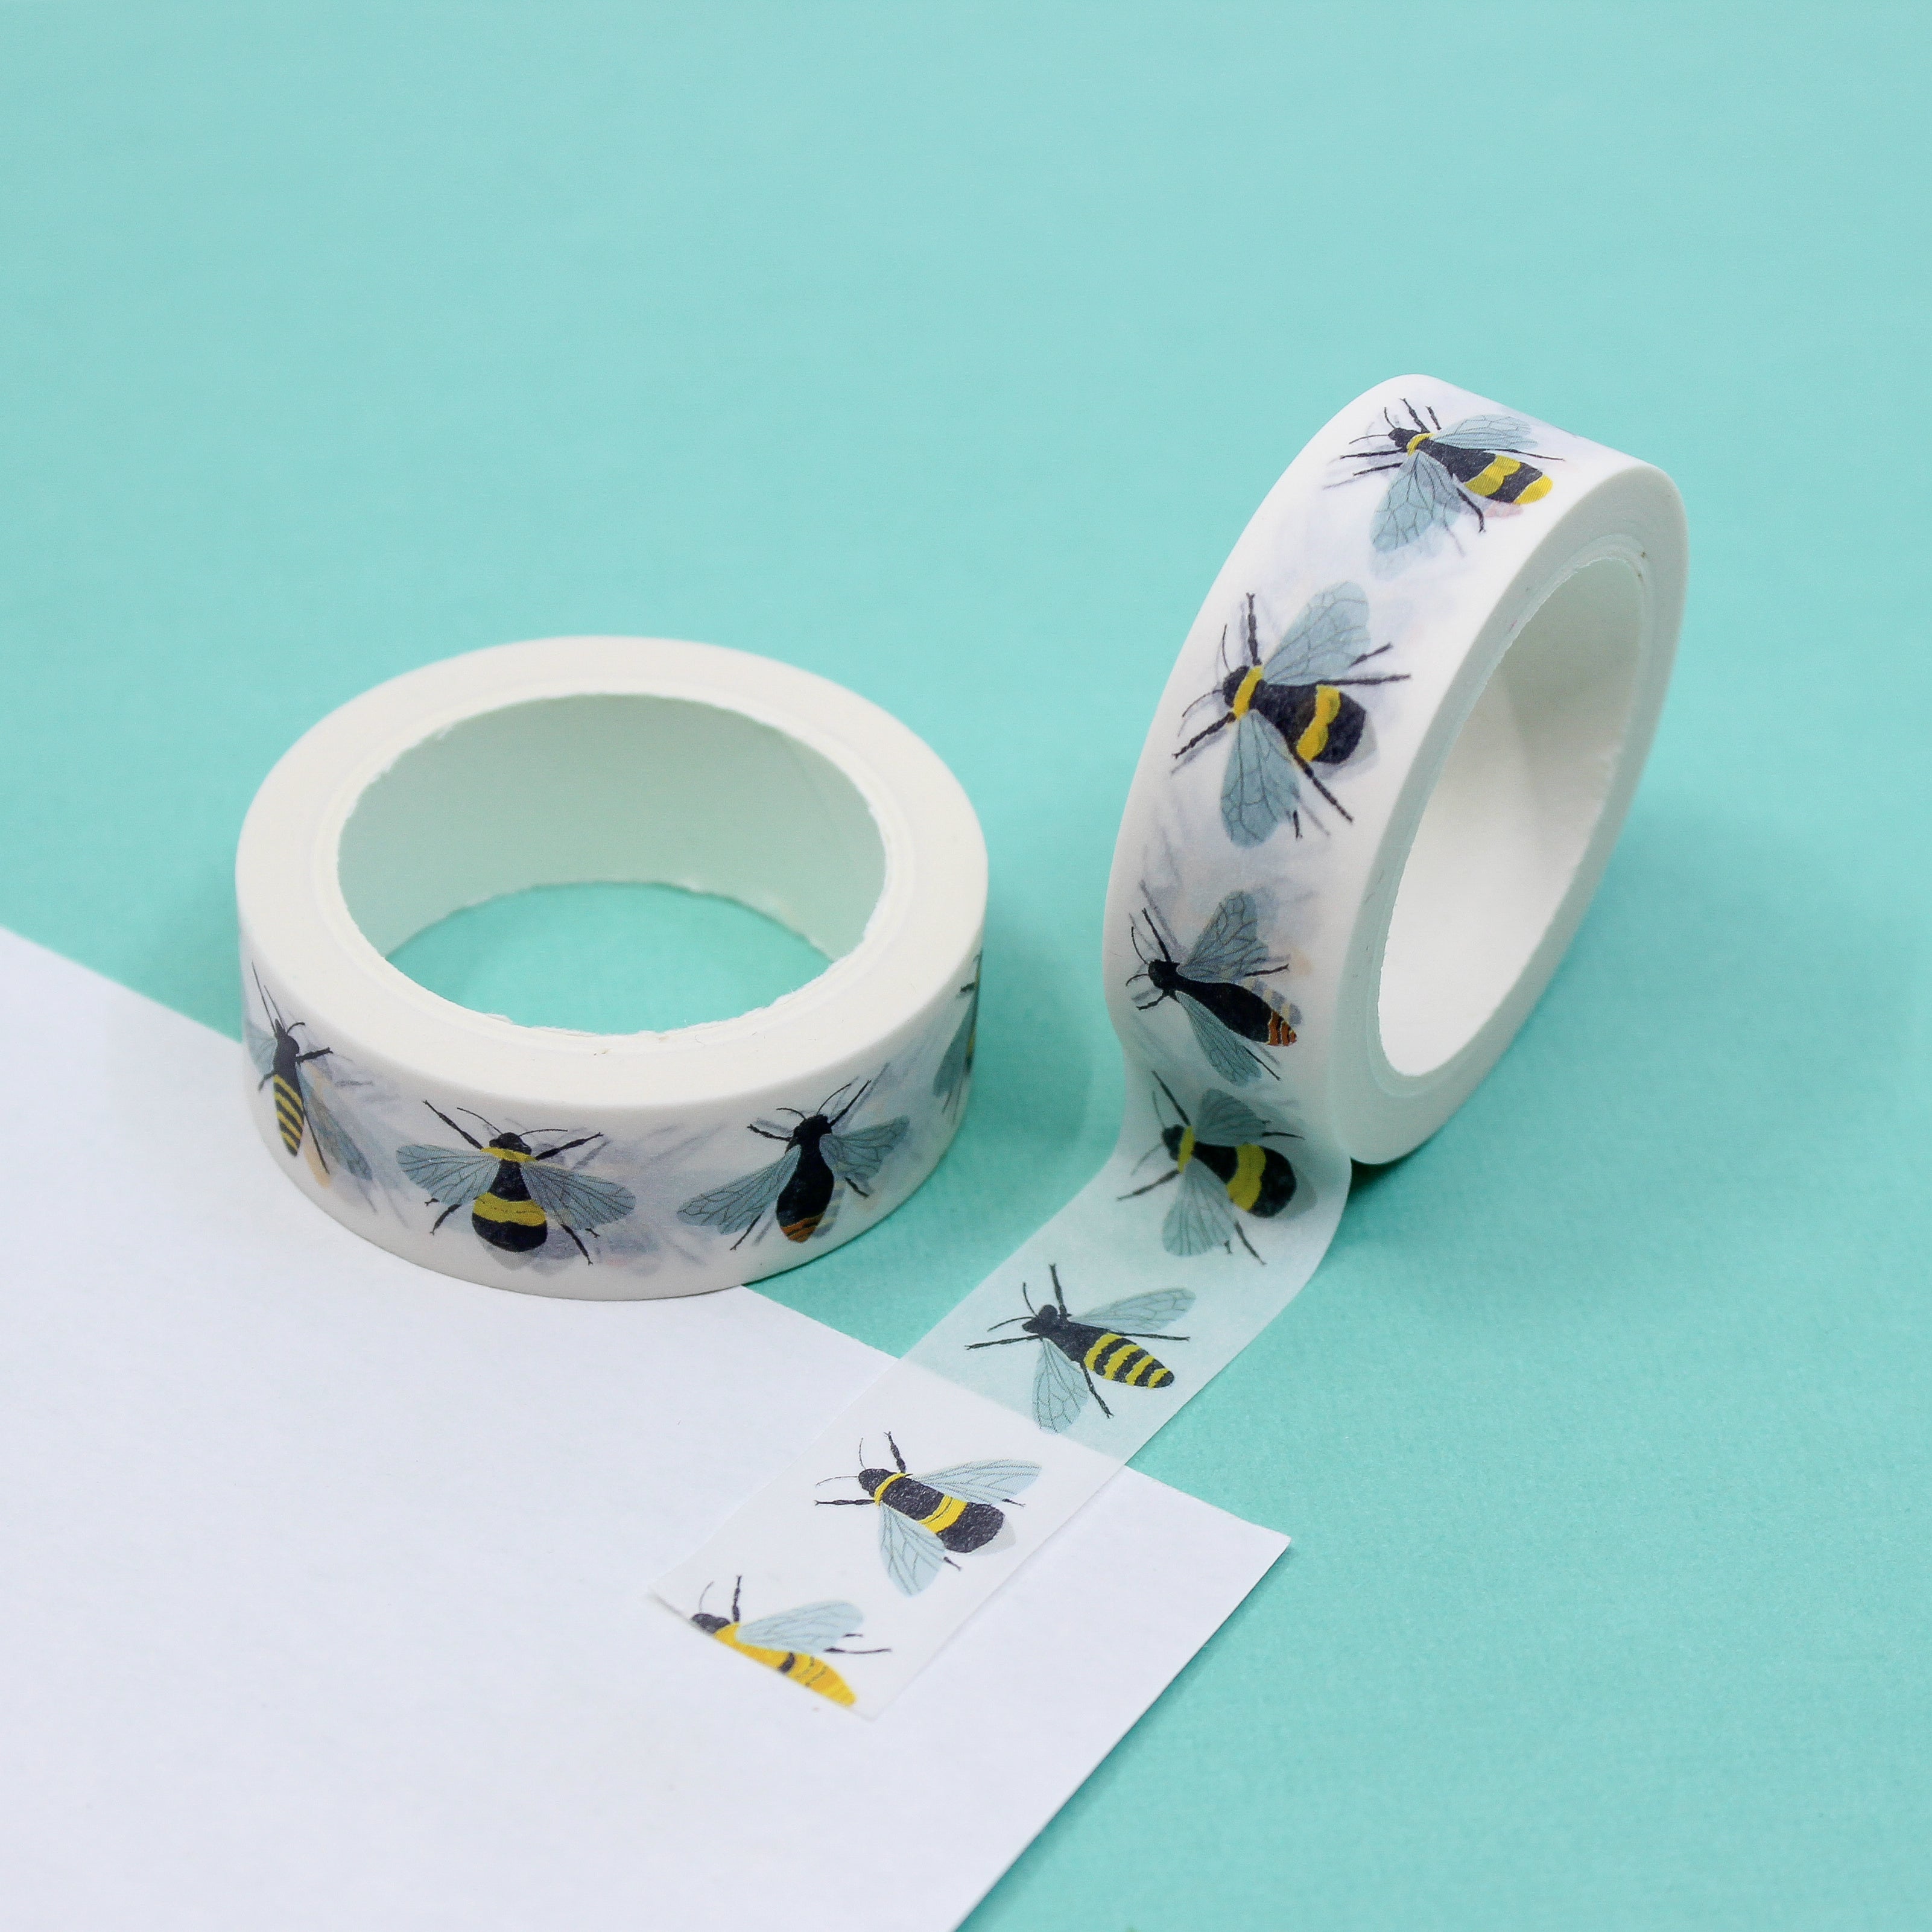 Capture the essence of British wildlife with our British Bumble Bees Washi Tape, adorned with charming illustrations of bumblebees. Ideal for adding a touch of nature and sweetness to your projects. This tape is designed by Sarah Francis and sold at BBB Supplies Craft Shop.